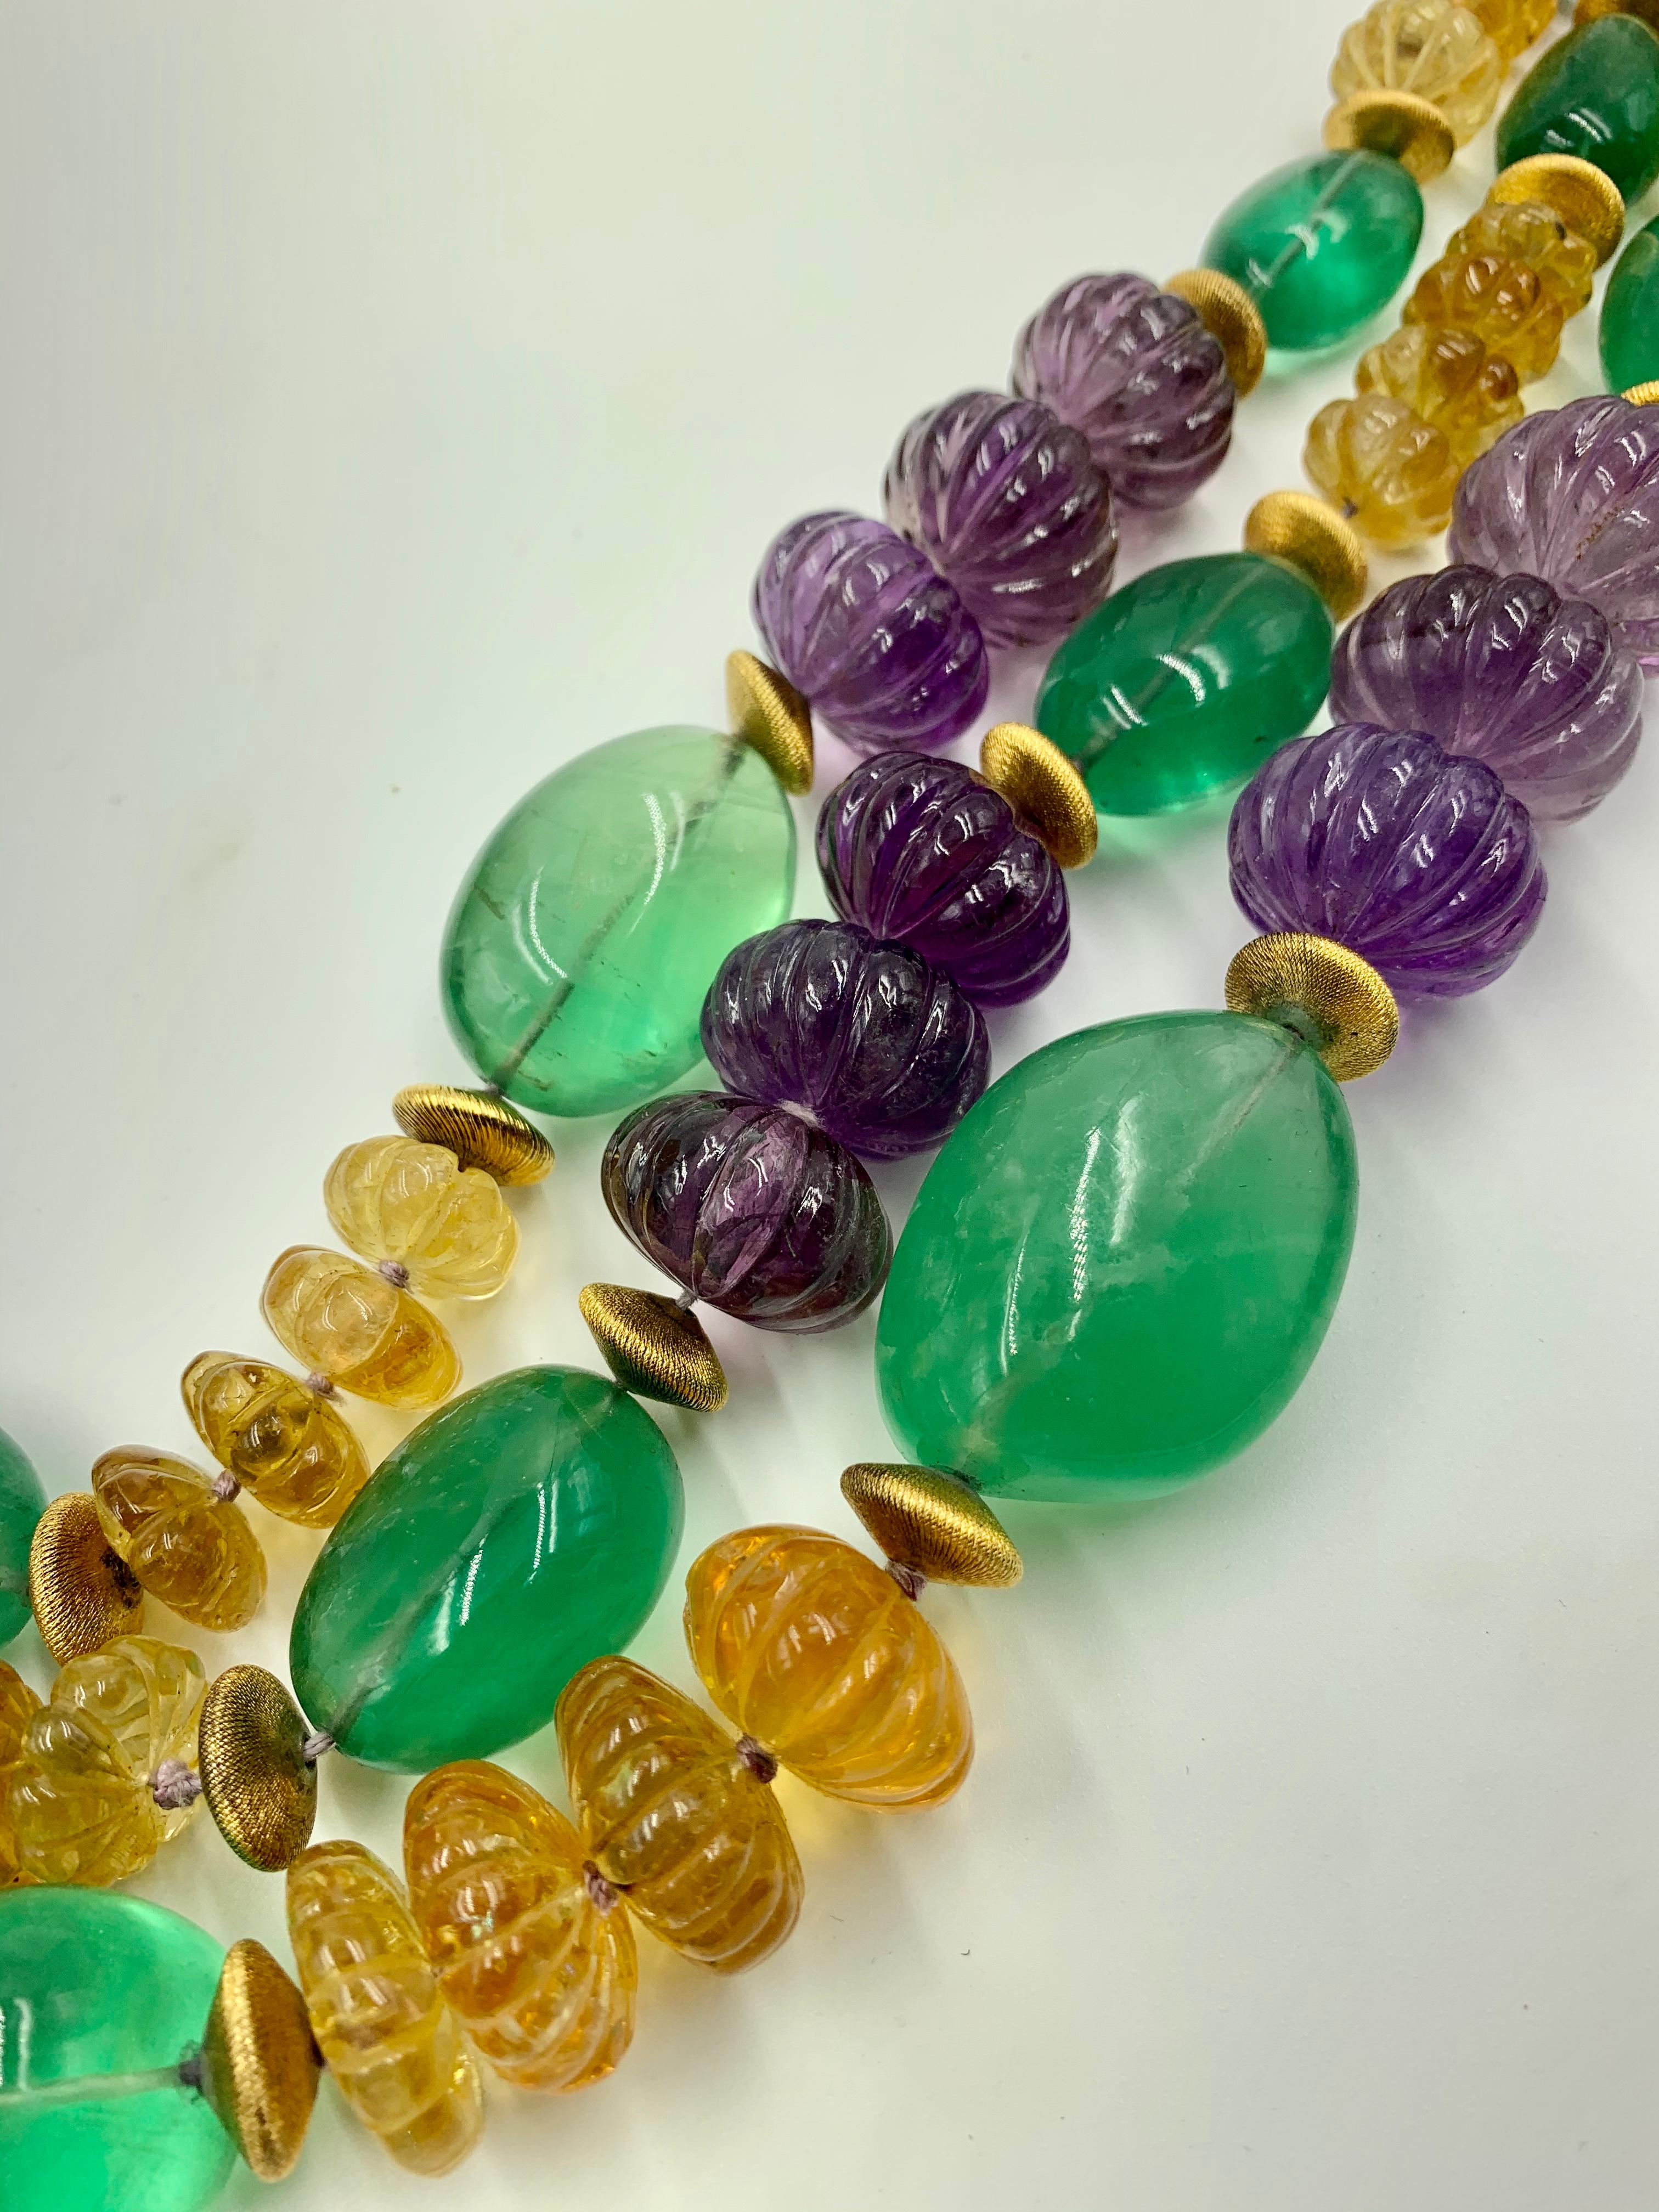 Vintage Iradj Moini Amethyst, Citrine, Fluorite and Gold-Plated Bead Necklace 1